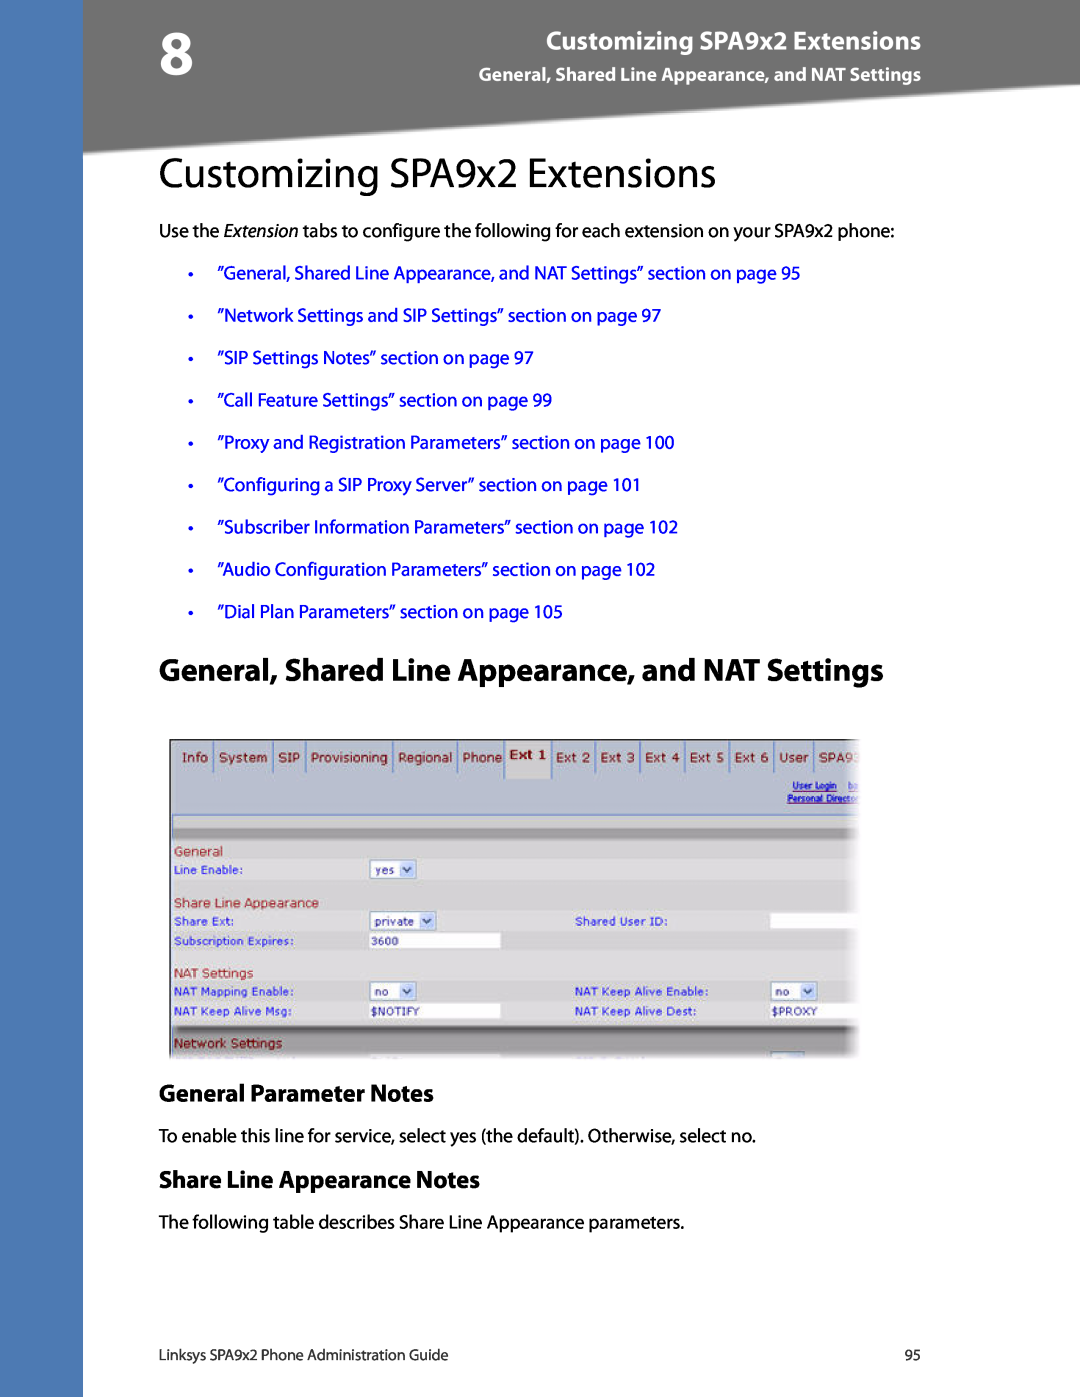 Linksys SPA932 Customizing SPA9x2 Extensions, General, Shared Line Appearance, and NAT Settings, General Parameter Notes 